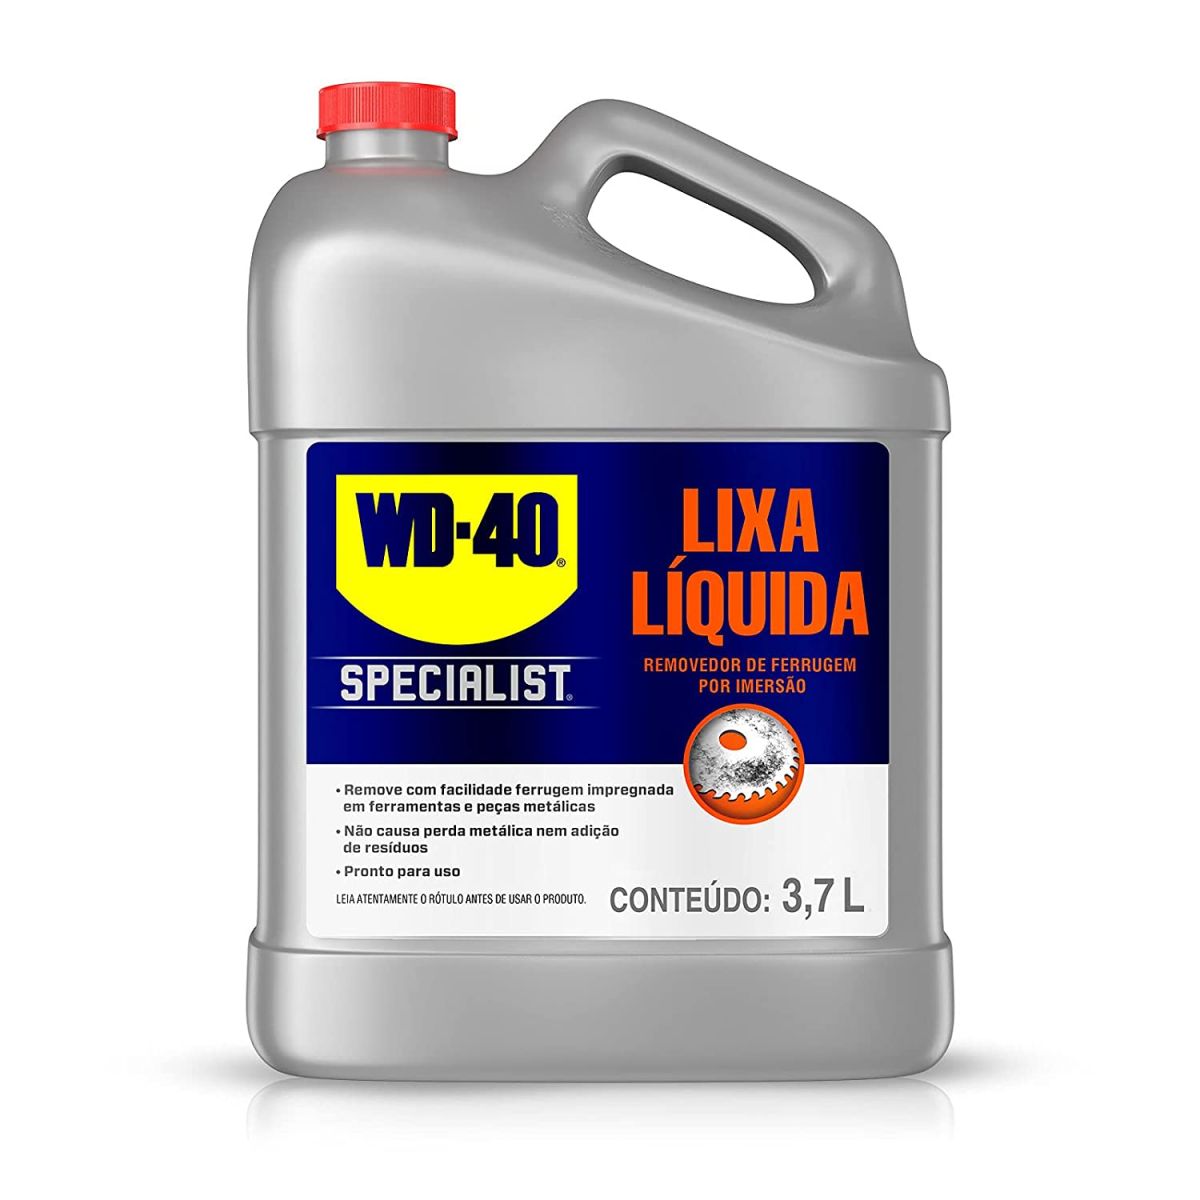 WD-40 rust remover